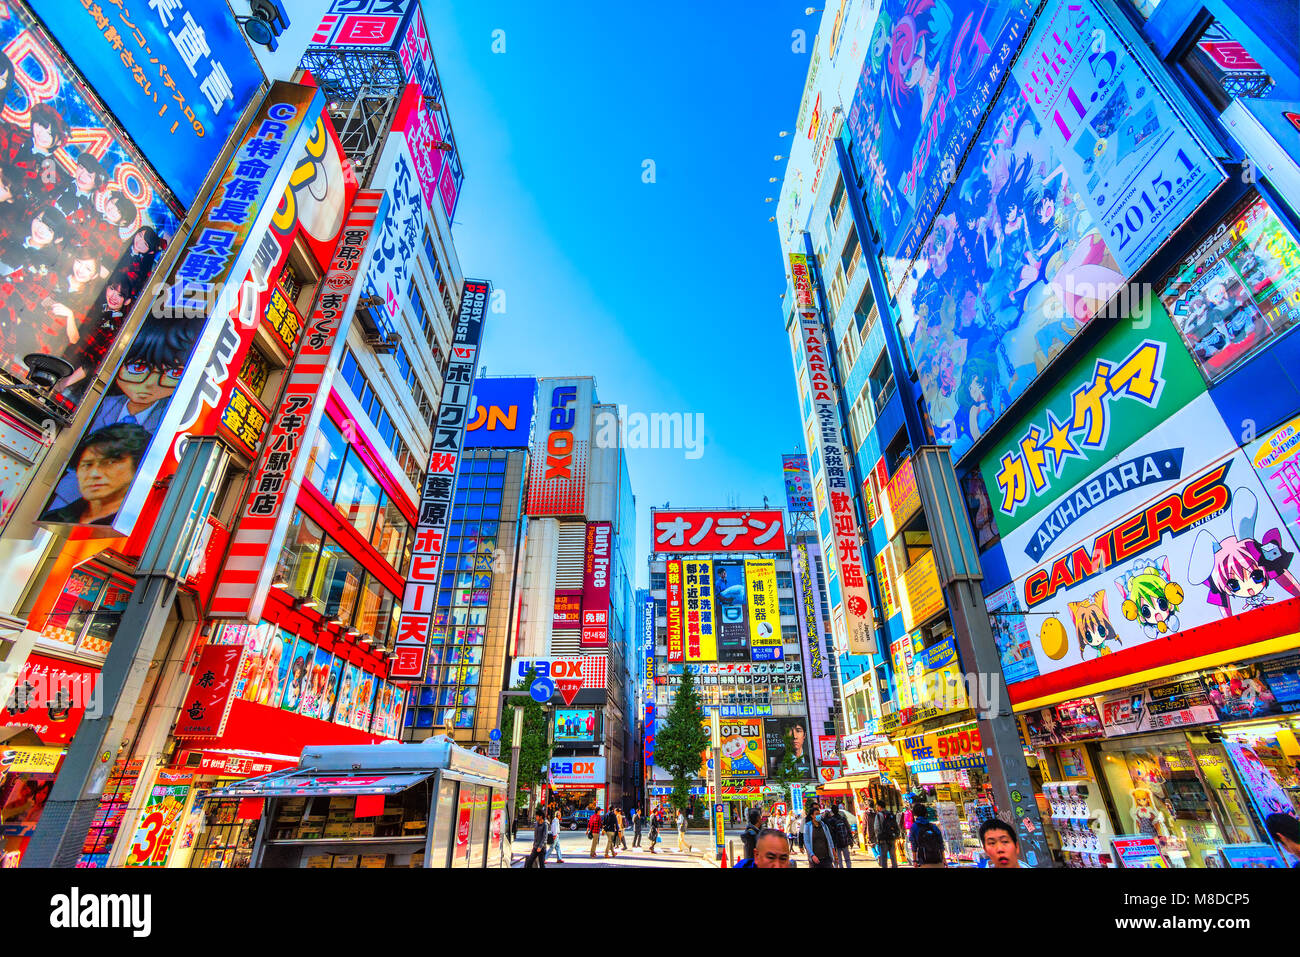 TOKYO - NOVEMBER 13: Akihabara district November13, 2014 in Tokyo, JP. The district is a major shopping area for electronic, computer, anime, games an Stock Photo